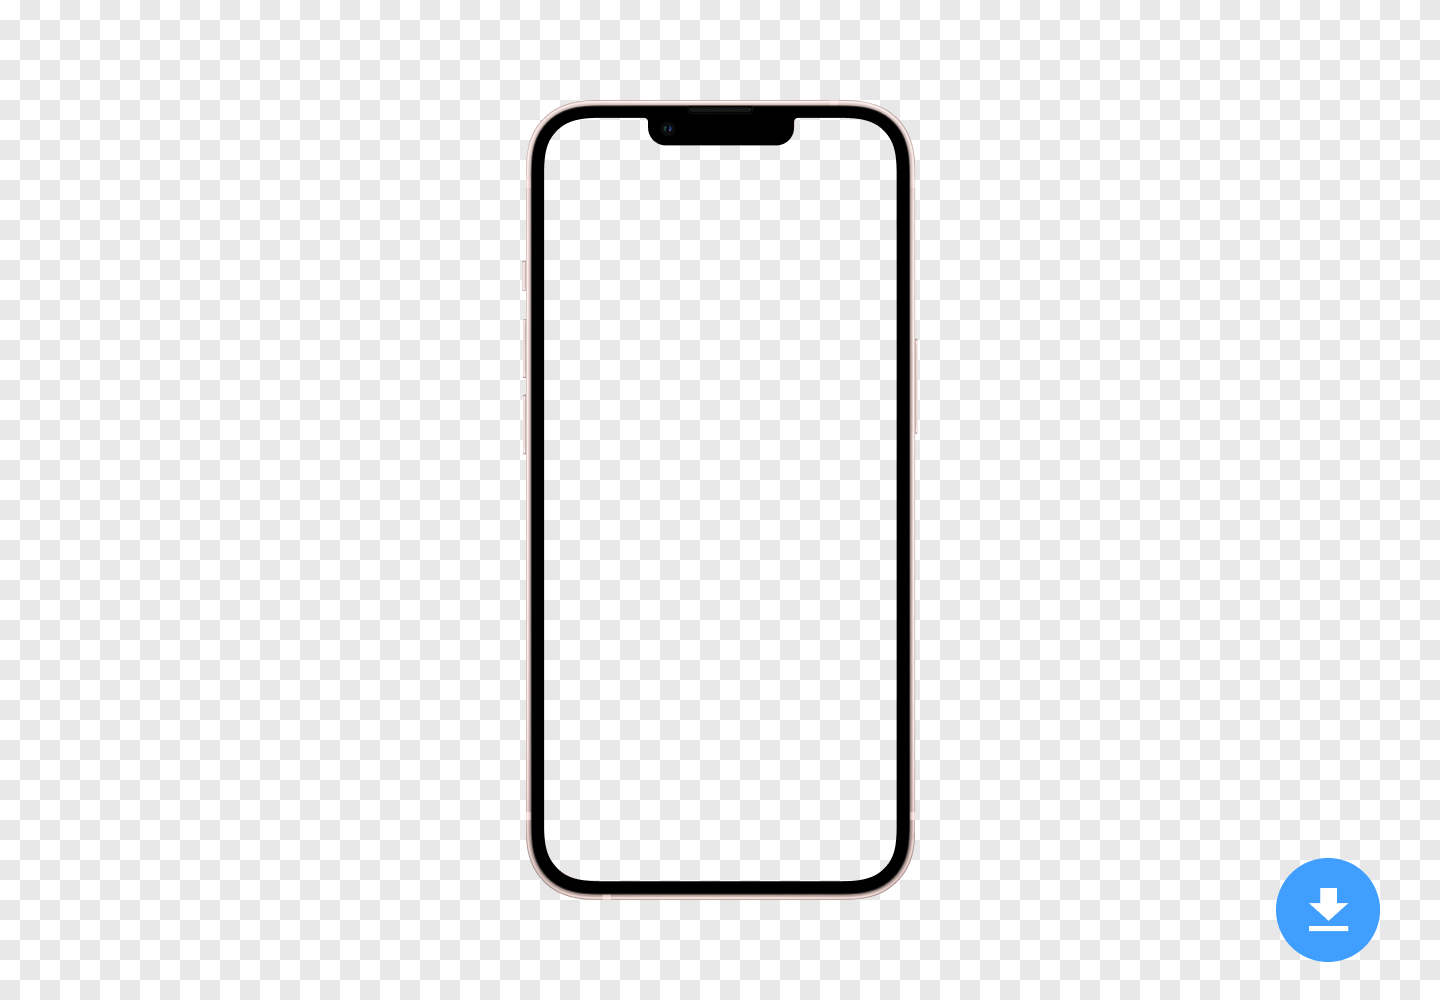 Free HD mockup of Apple iPhone 13 Mini (2021) in PNG and PSD image format with transparent background